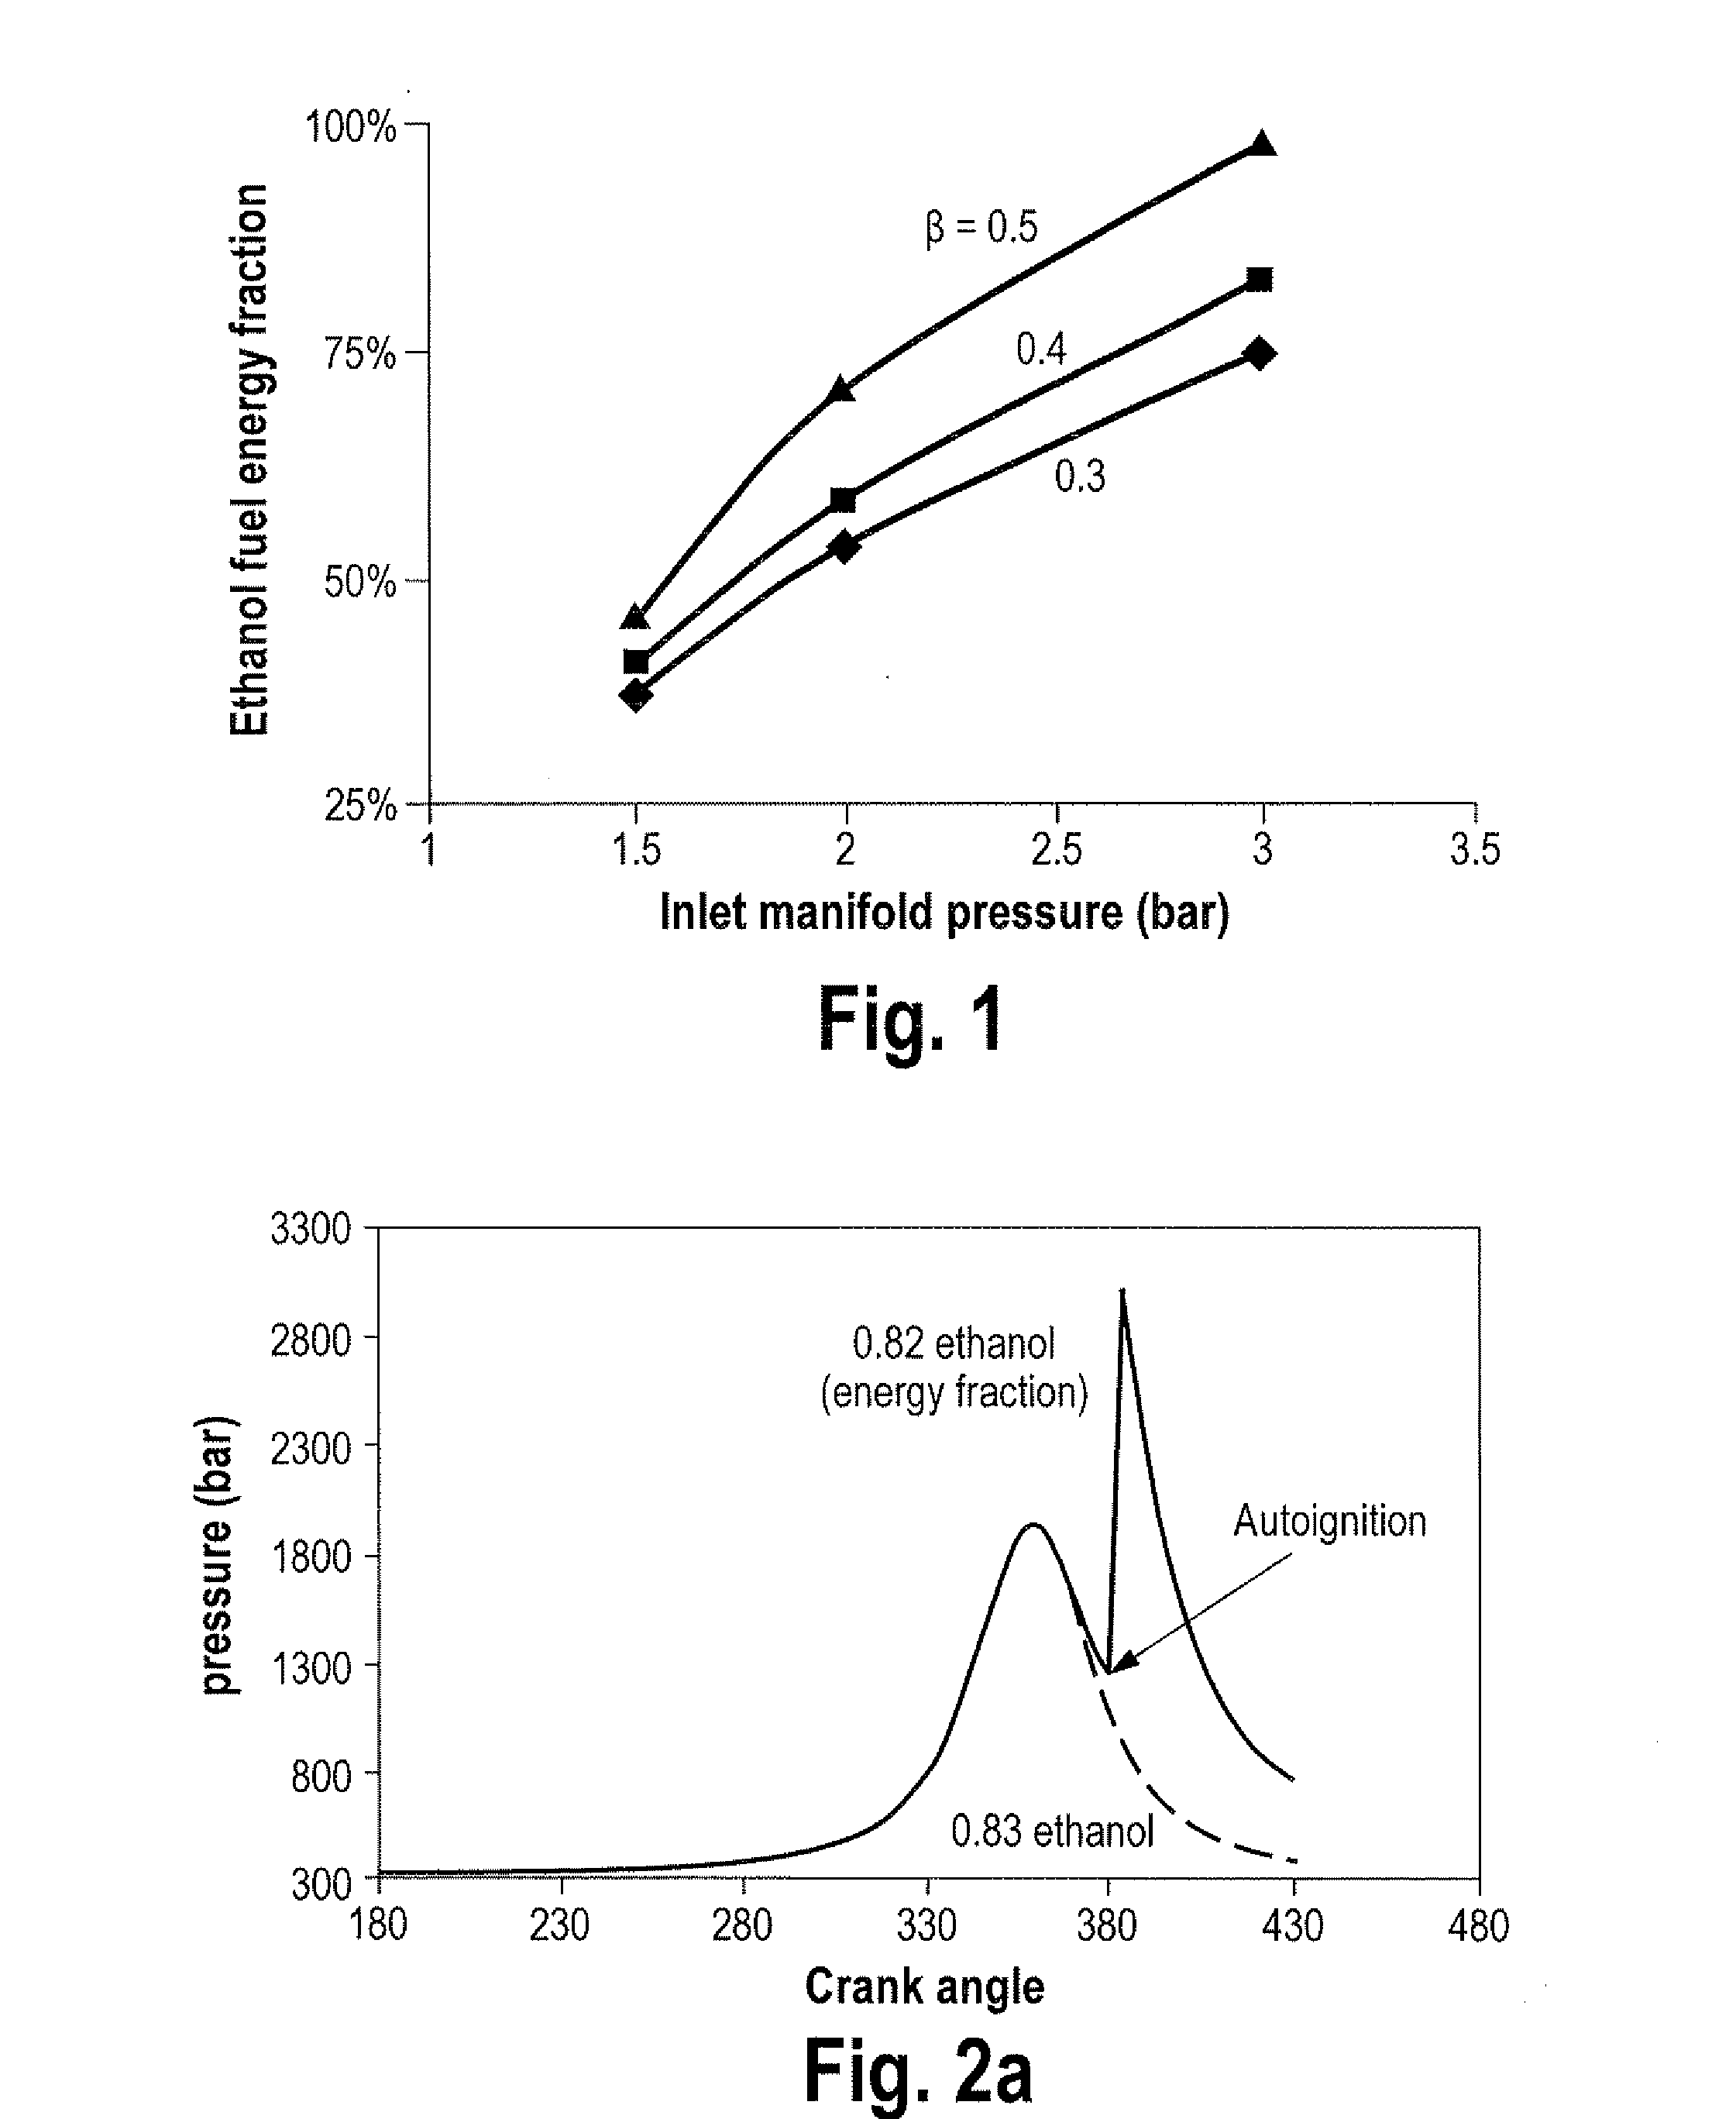 Optimized fuel management system for direct injection ethanol enhancement of gasoline engines